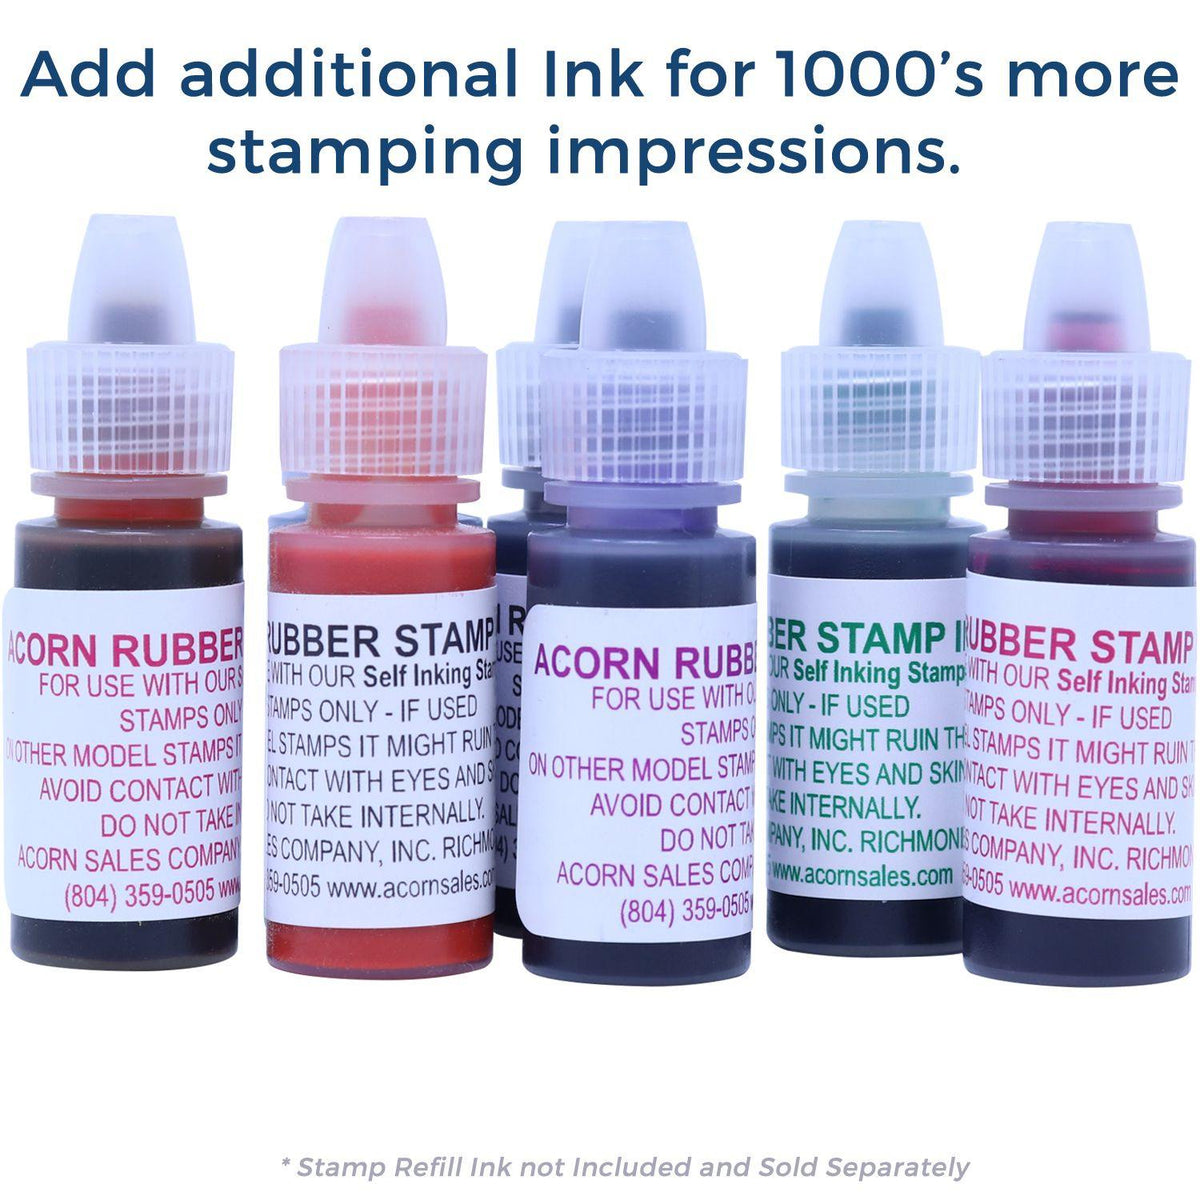 Refill Inks for Large Pre-Inked Special Standard Mail Stamp Available